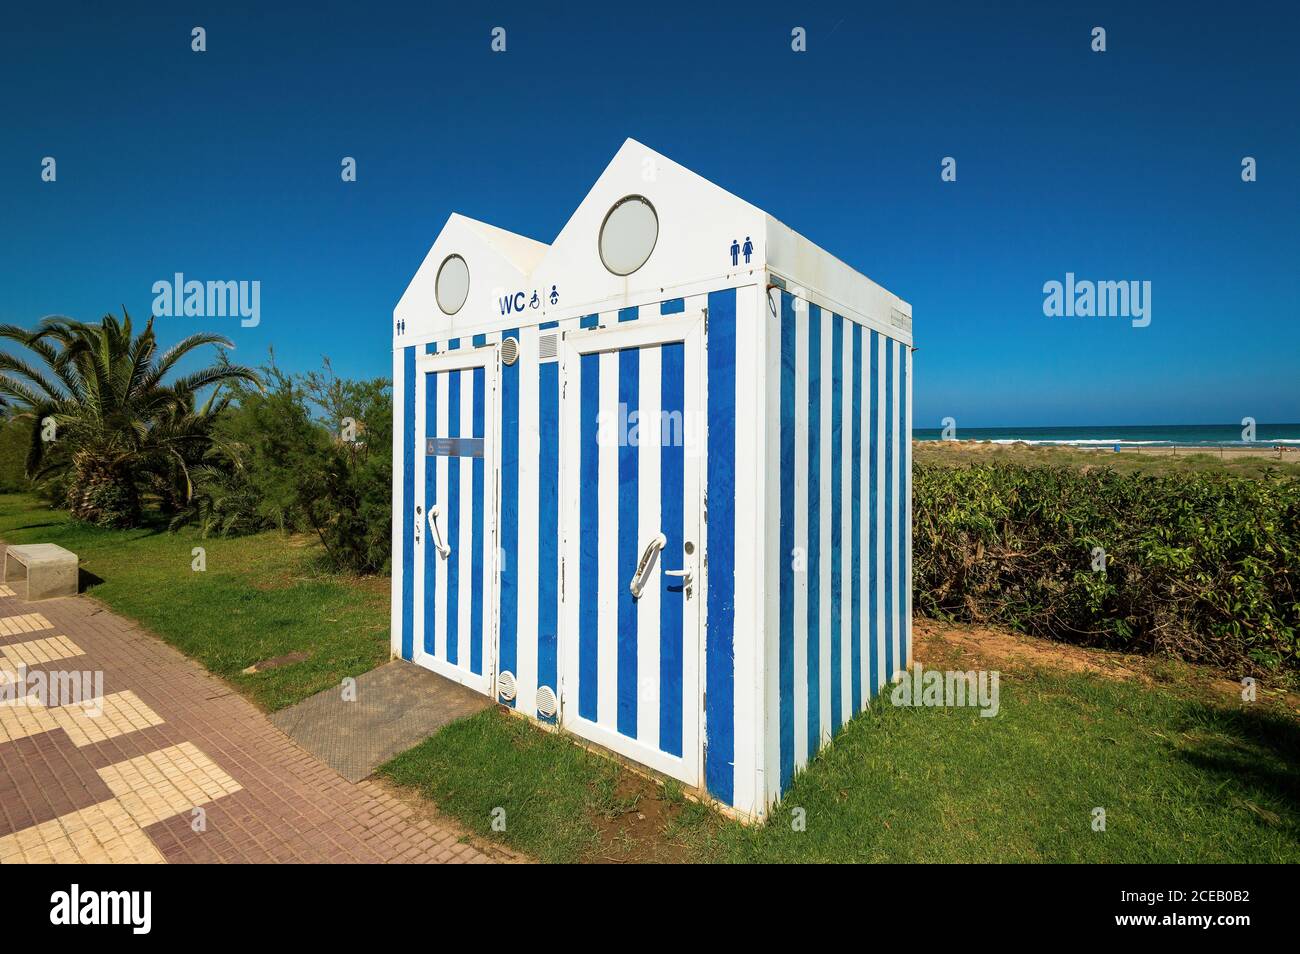 Two public lavatories standing on grass not far from beach and sea. Stock Photo